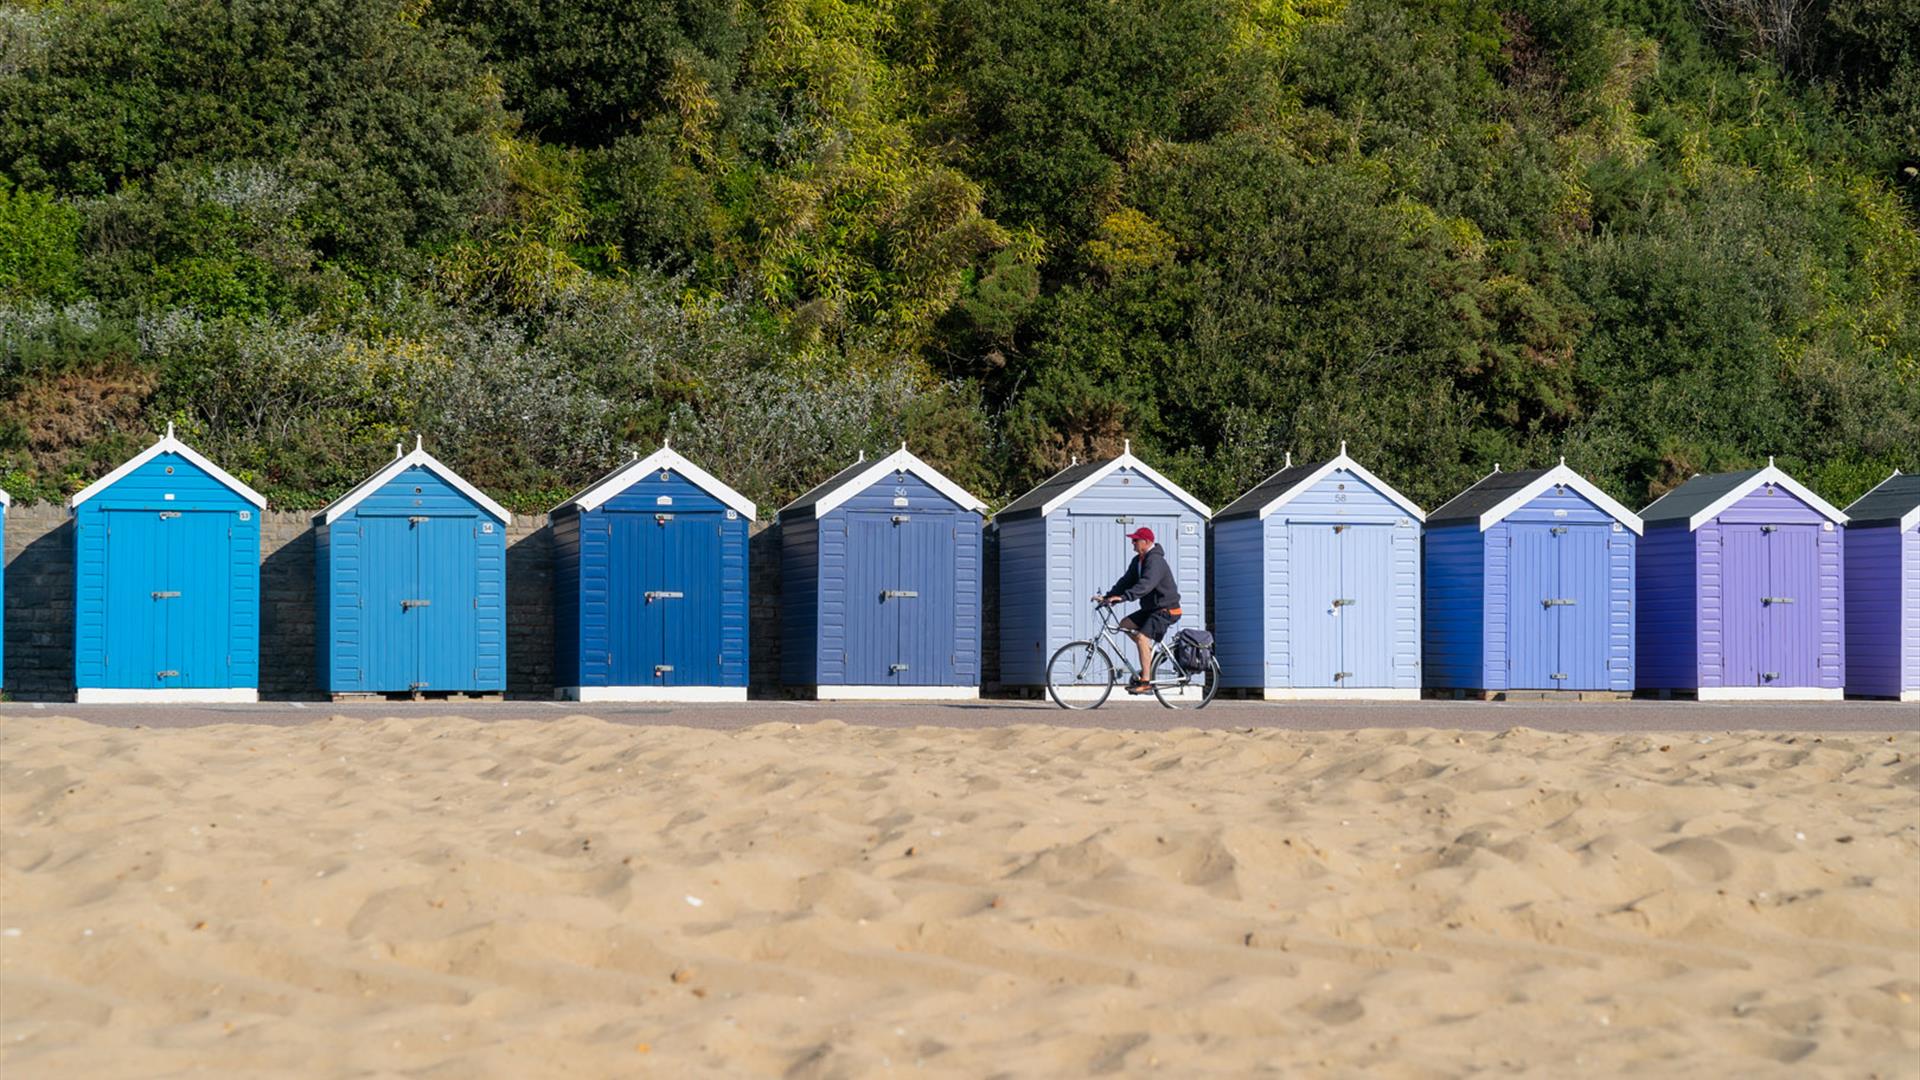 Rows of purple and pink coloured beach huts along bournemouth beach with someone riding their bike alongside.